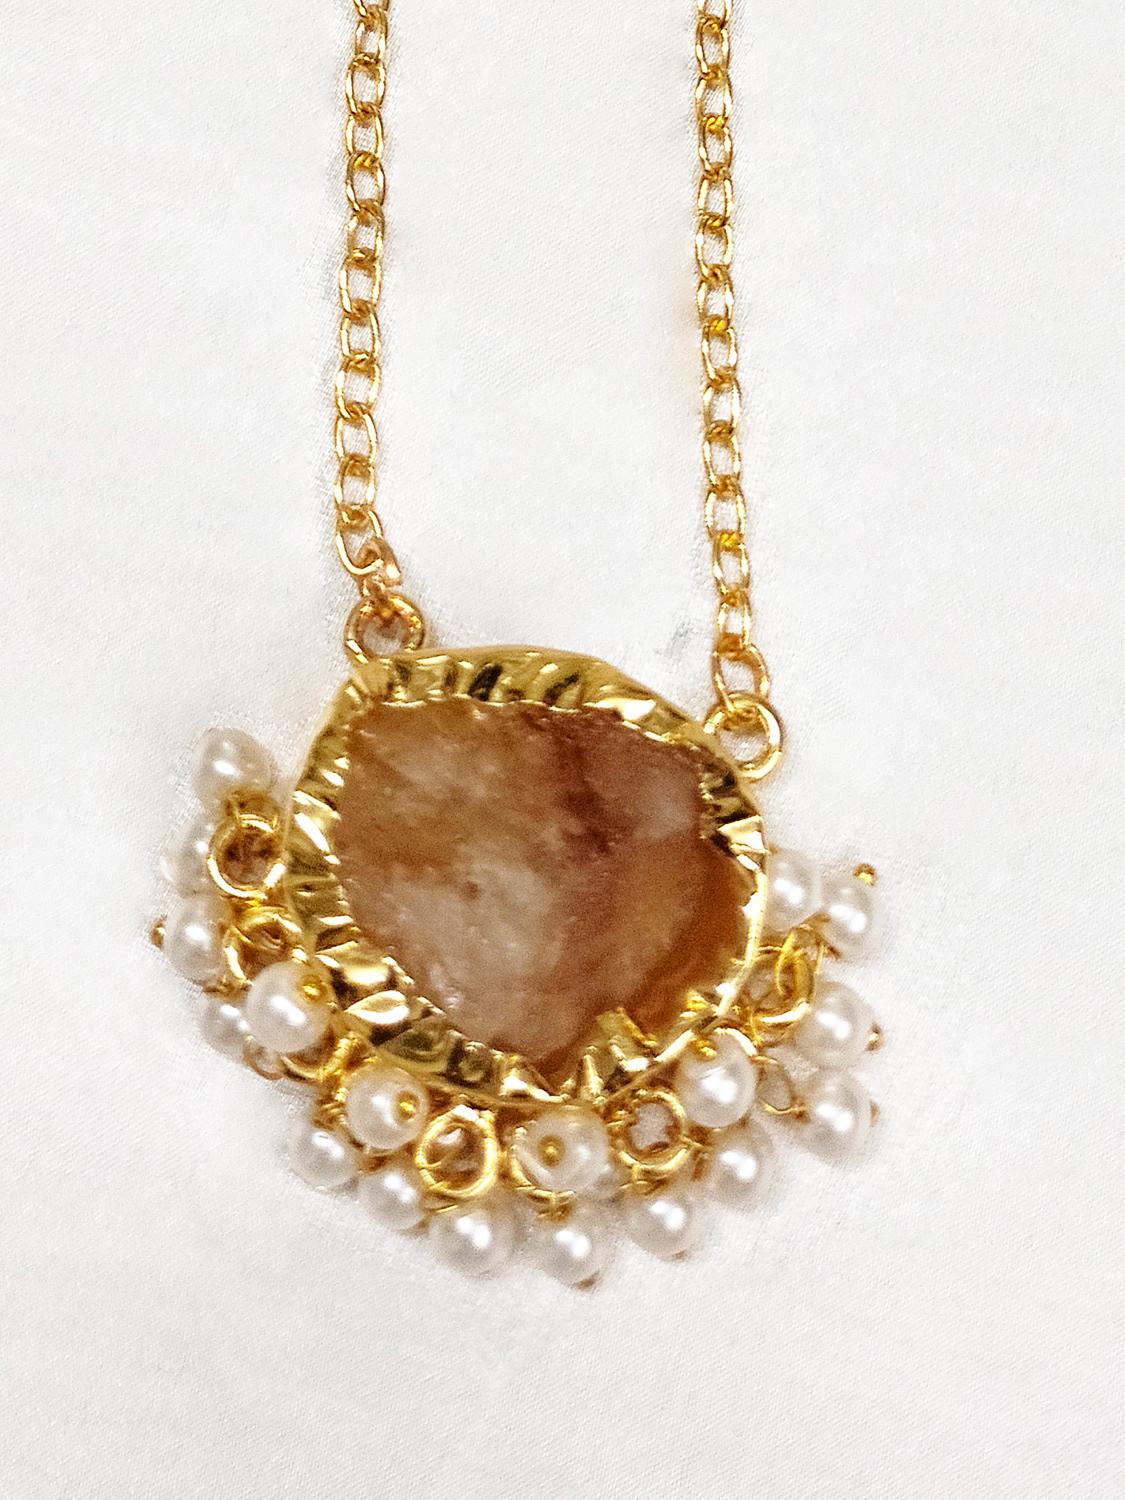 Handcrafted Gold Plated Rose Quartz Pendant Necklace